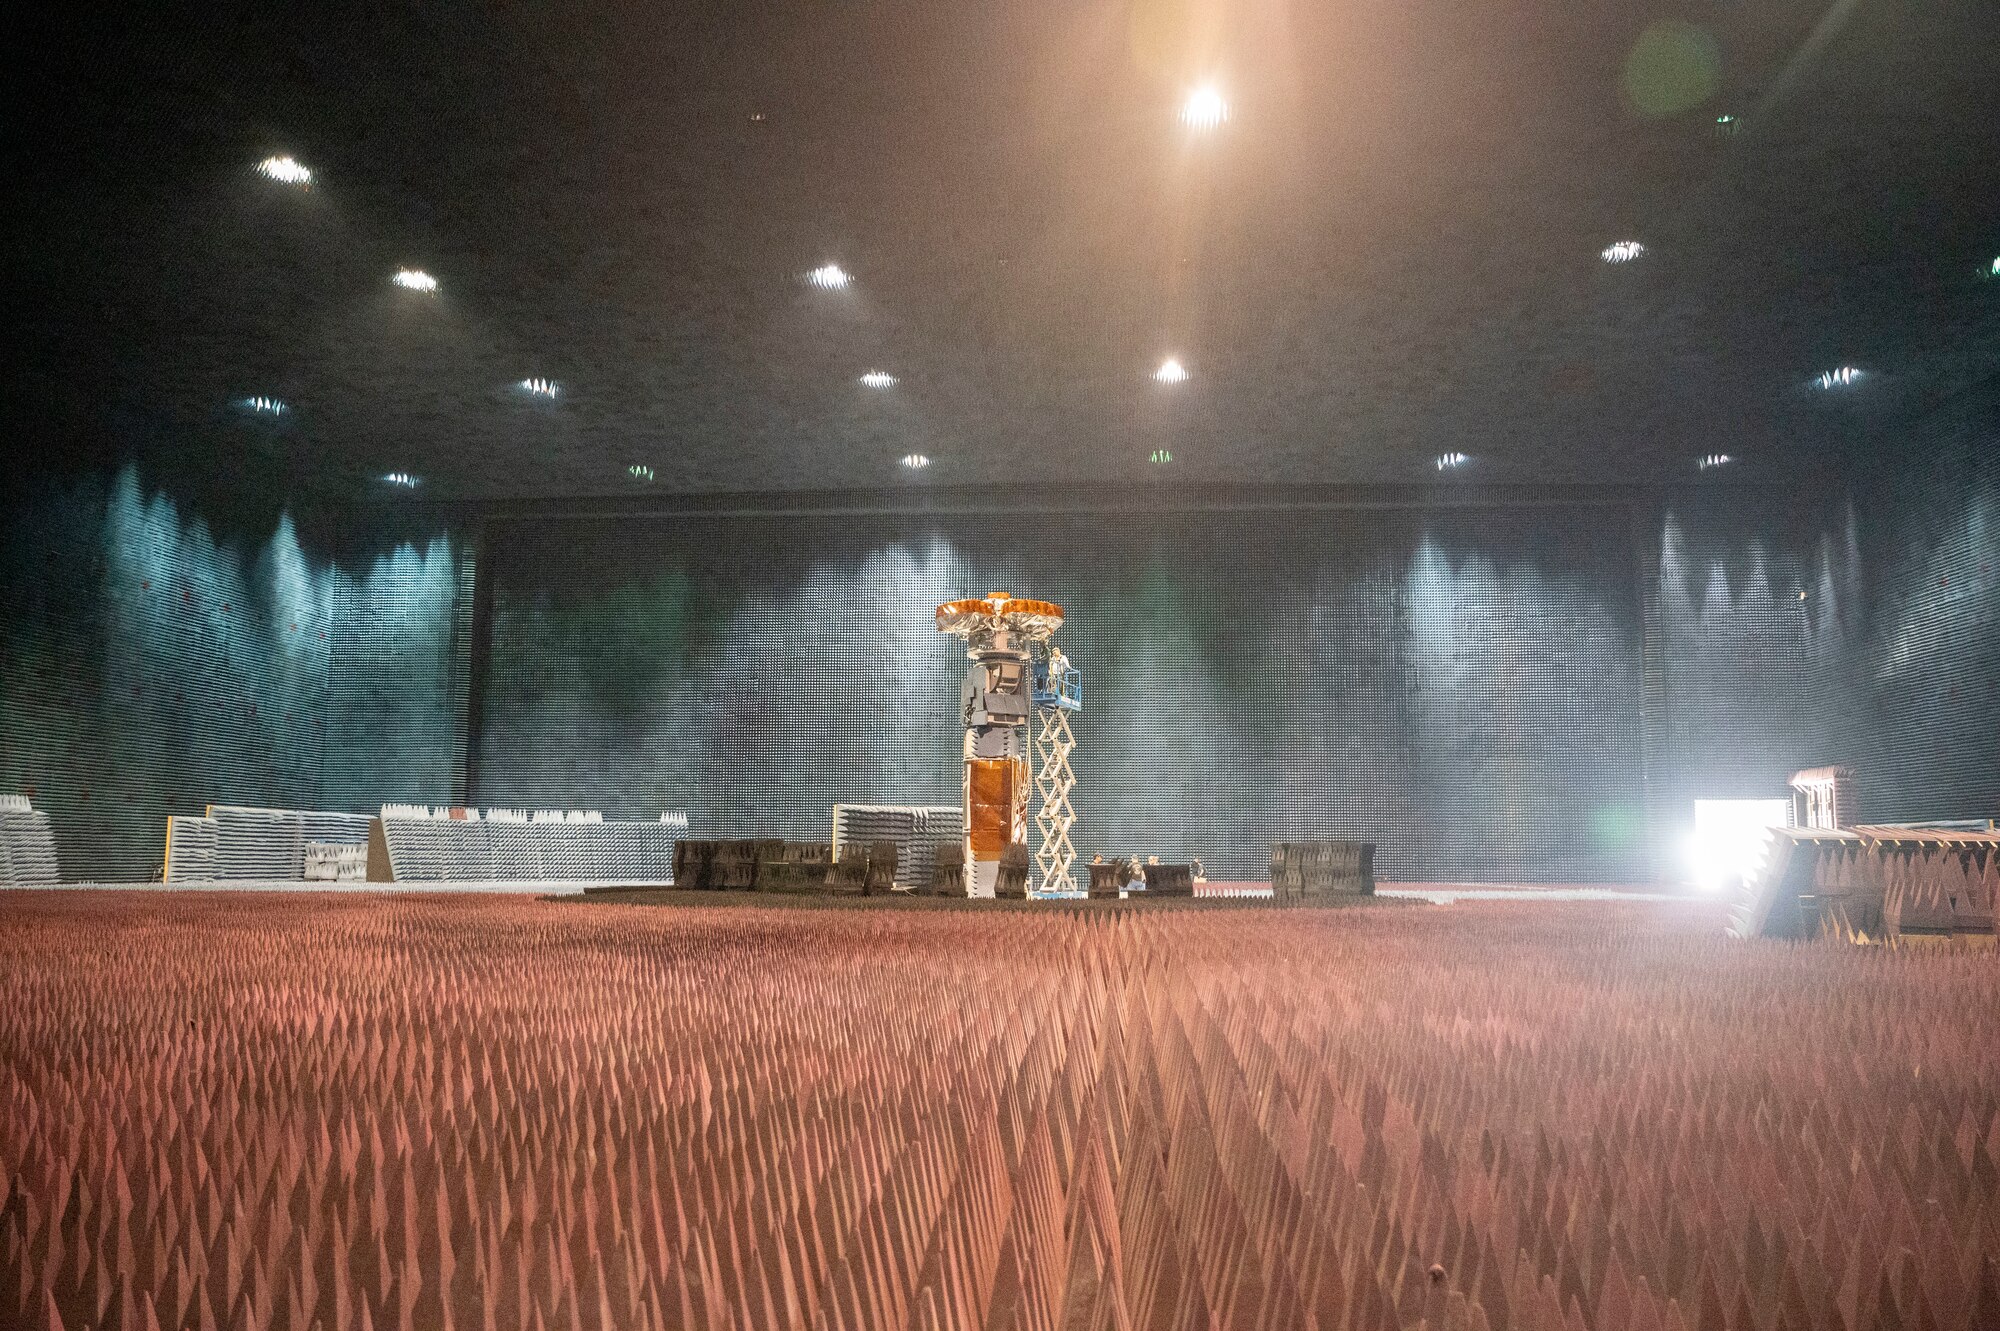 The largest anechoic test facility in the world, the BAF, provides shielding effectiveness that allows GPS tracking and jamming tests without frequency management or regulatory agency approval.